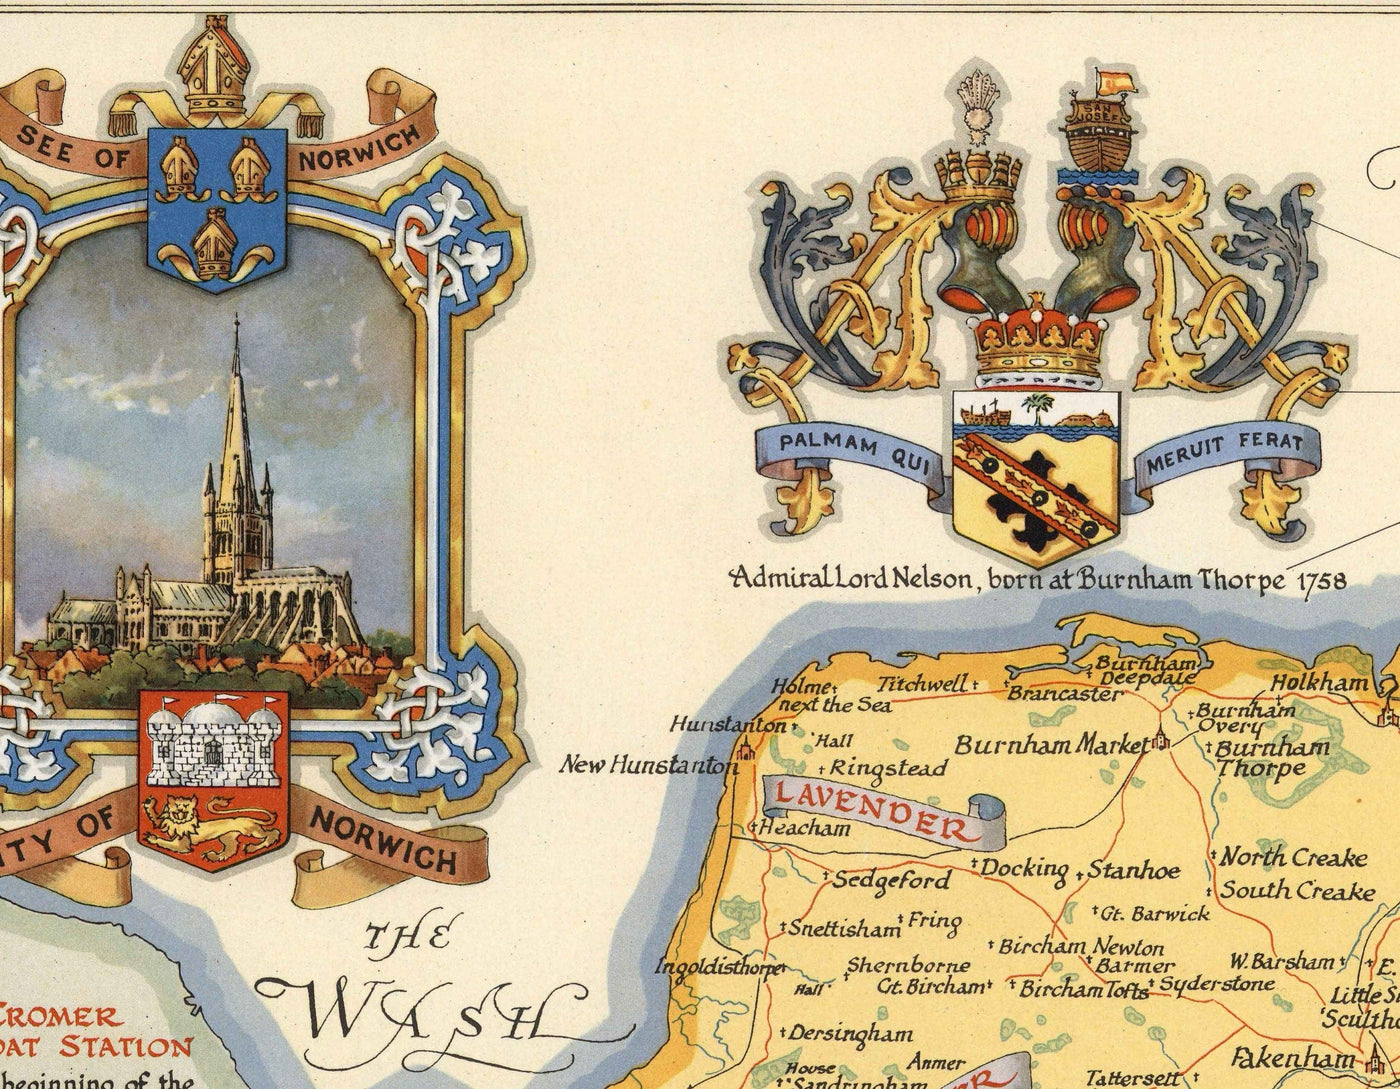 Old Map of Norfolk by Ernest Clegg, 1945 - Sandringham, Norwich, Yarmouth, Winston Churchill, Lord Nelson, WW2